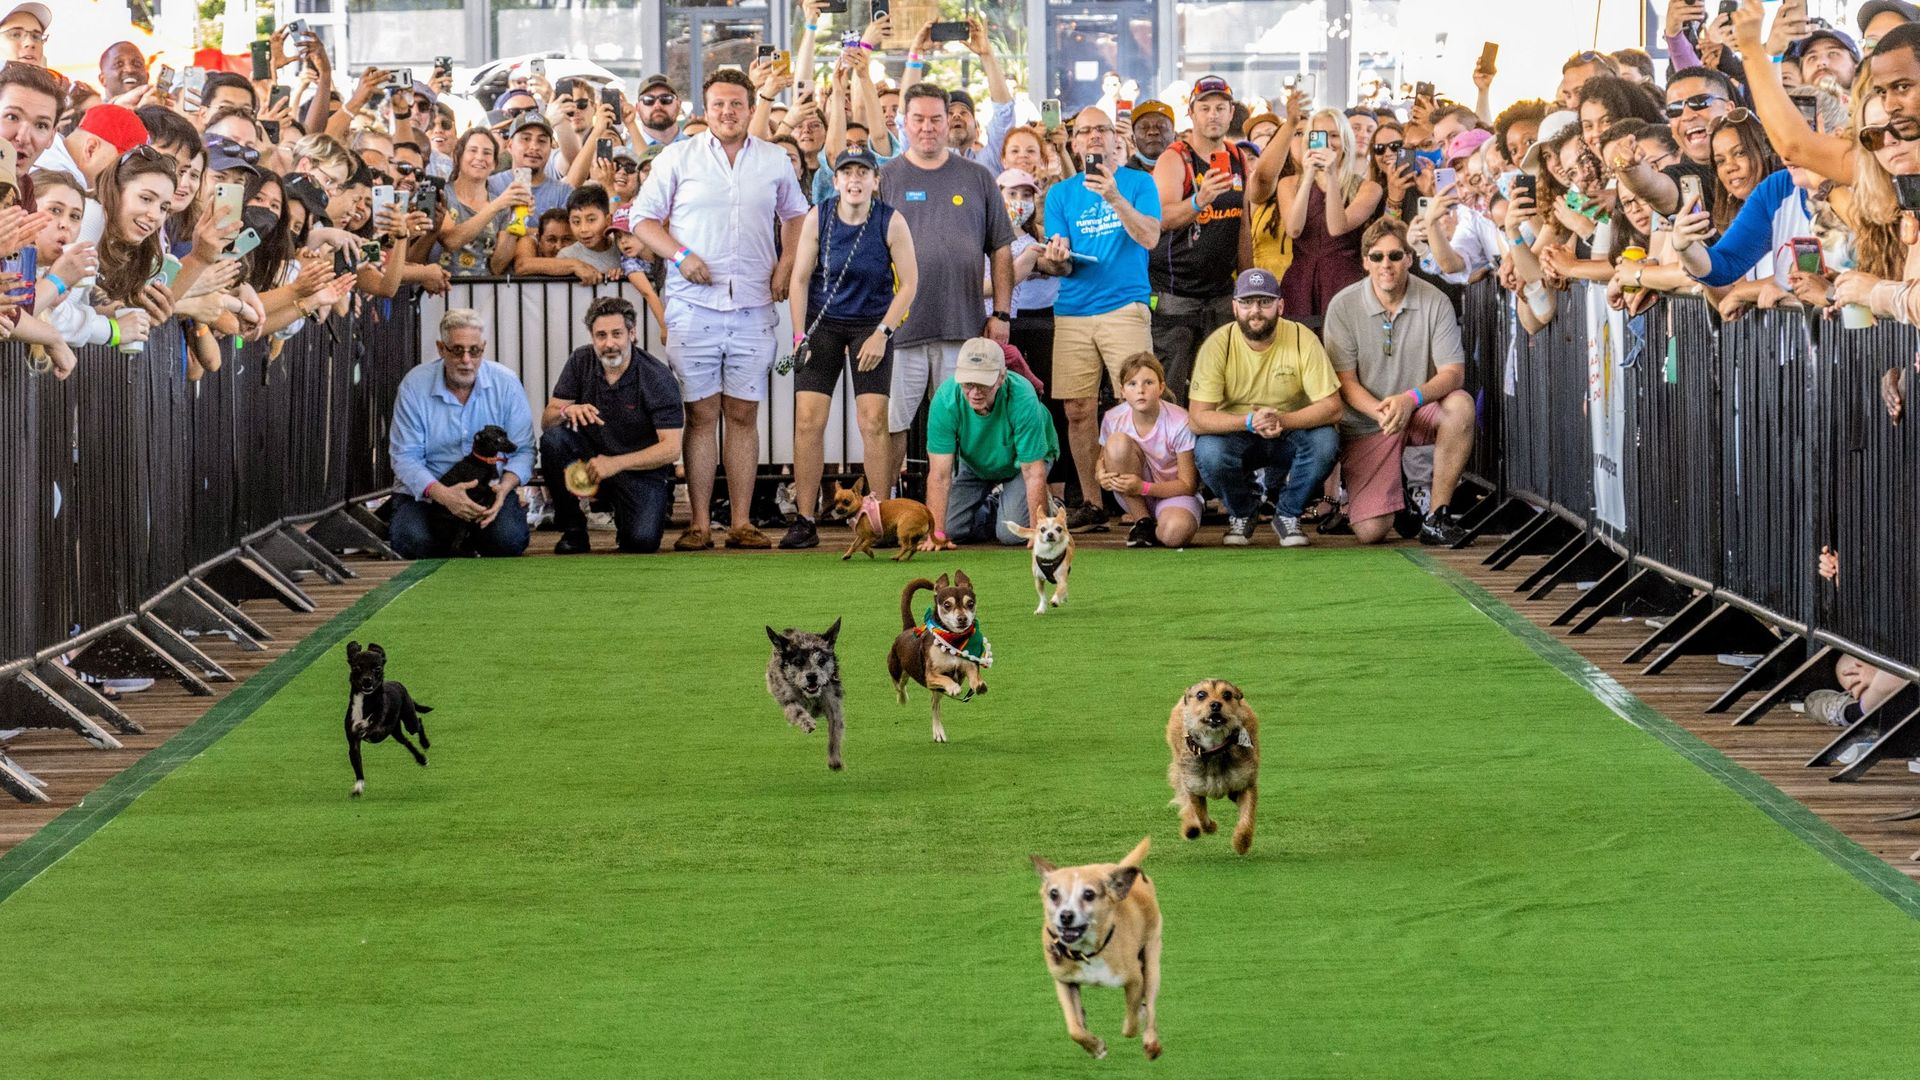 The Running of the Chihuahuas at the Wharf. Photograph courtesy of The Wharf, Washington DC